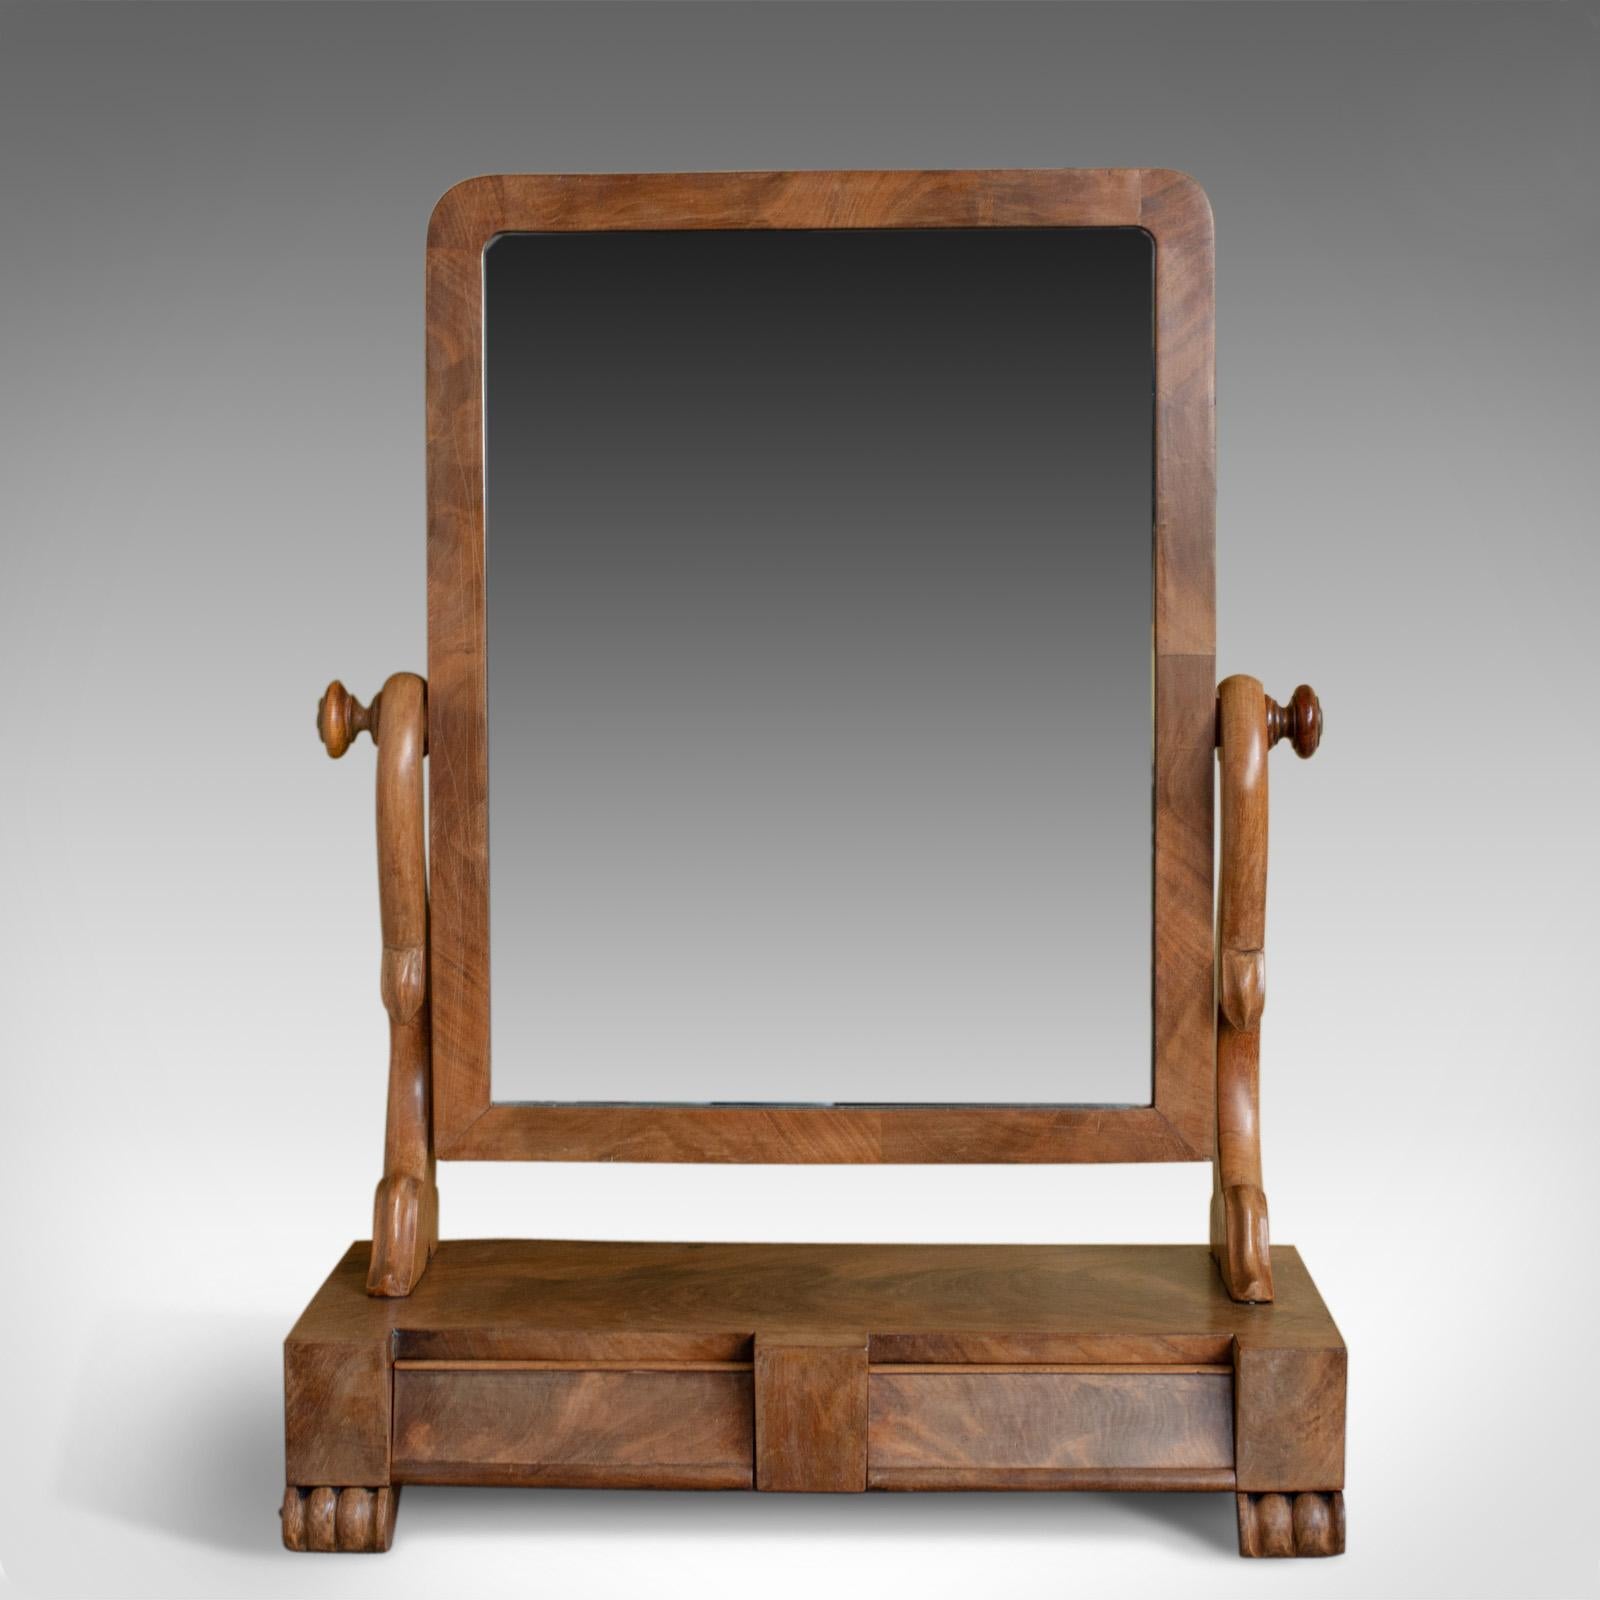 This is an antique dressing table mirror, an English, Victorian mahogany, adjustable swing mirror dating to circa 1870.

Of fine quality in mahogany with grain interest throughout
Good consistent color and a desirable aged patina
Well figured